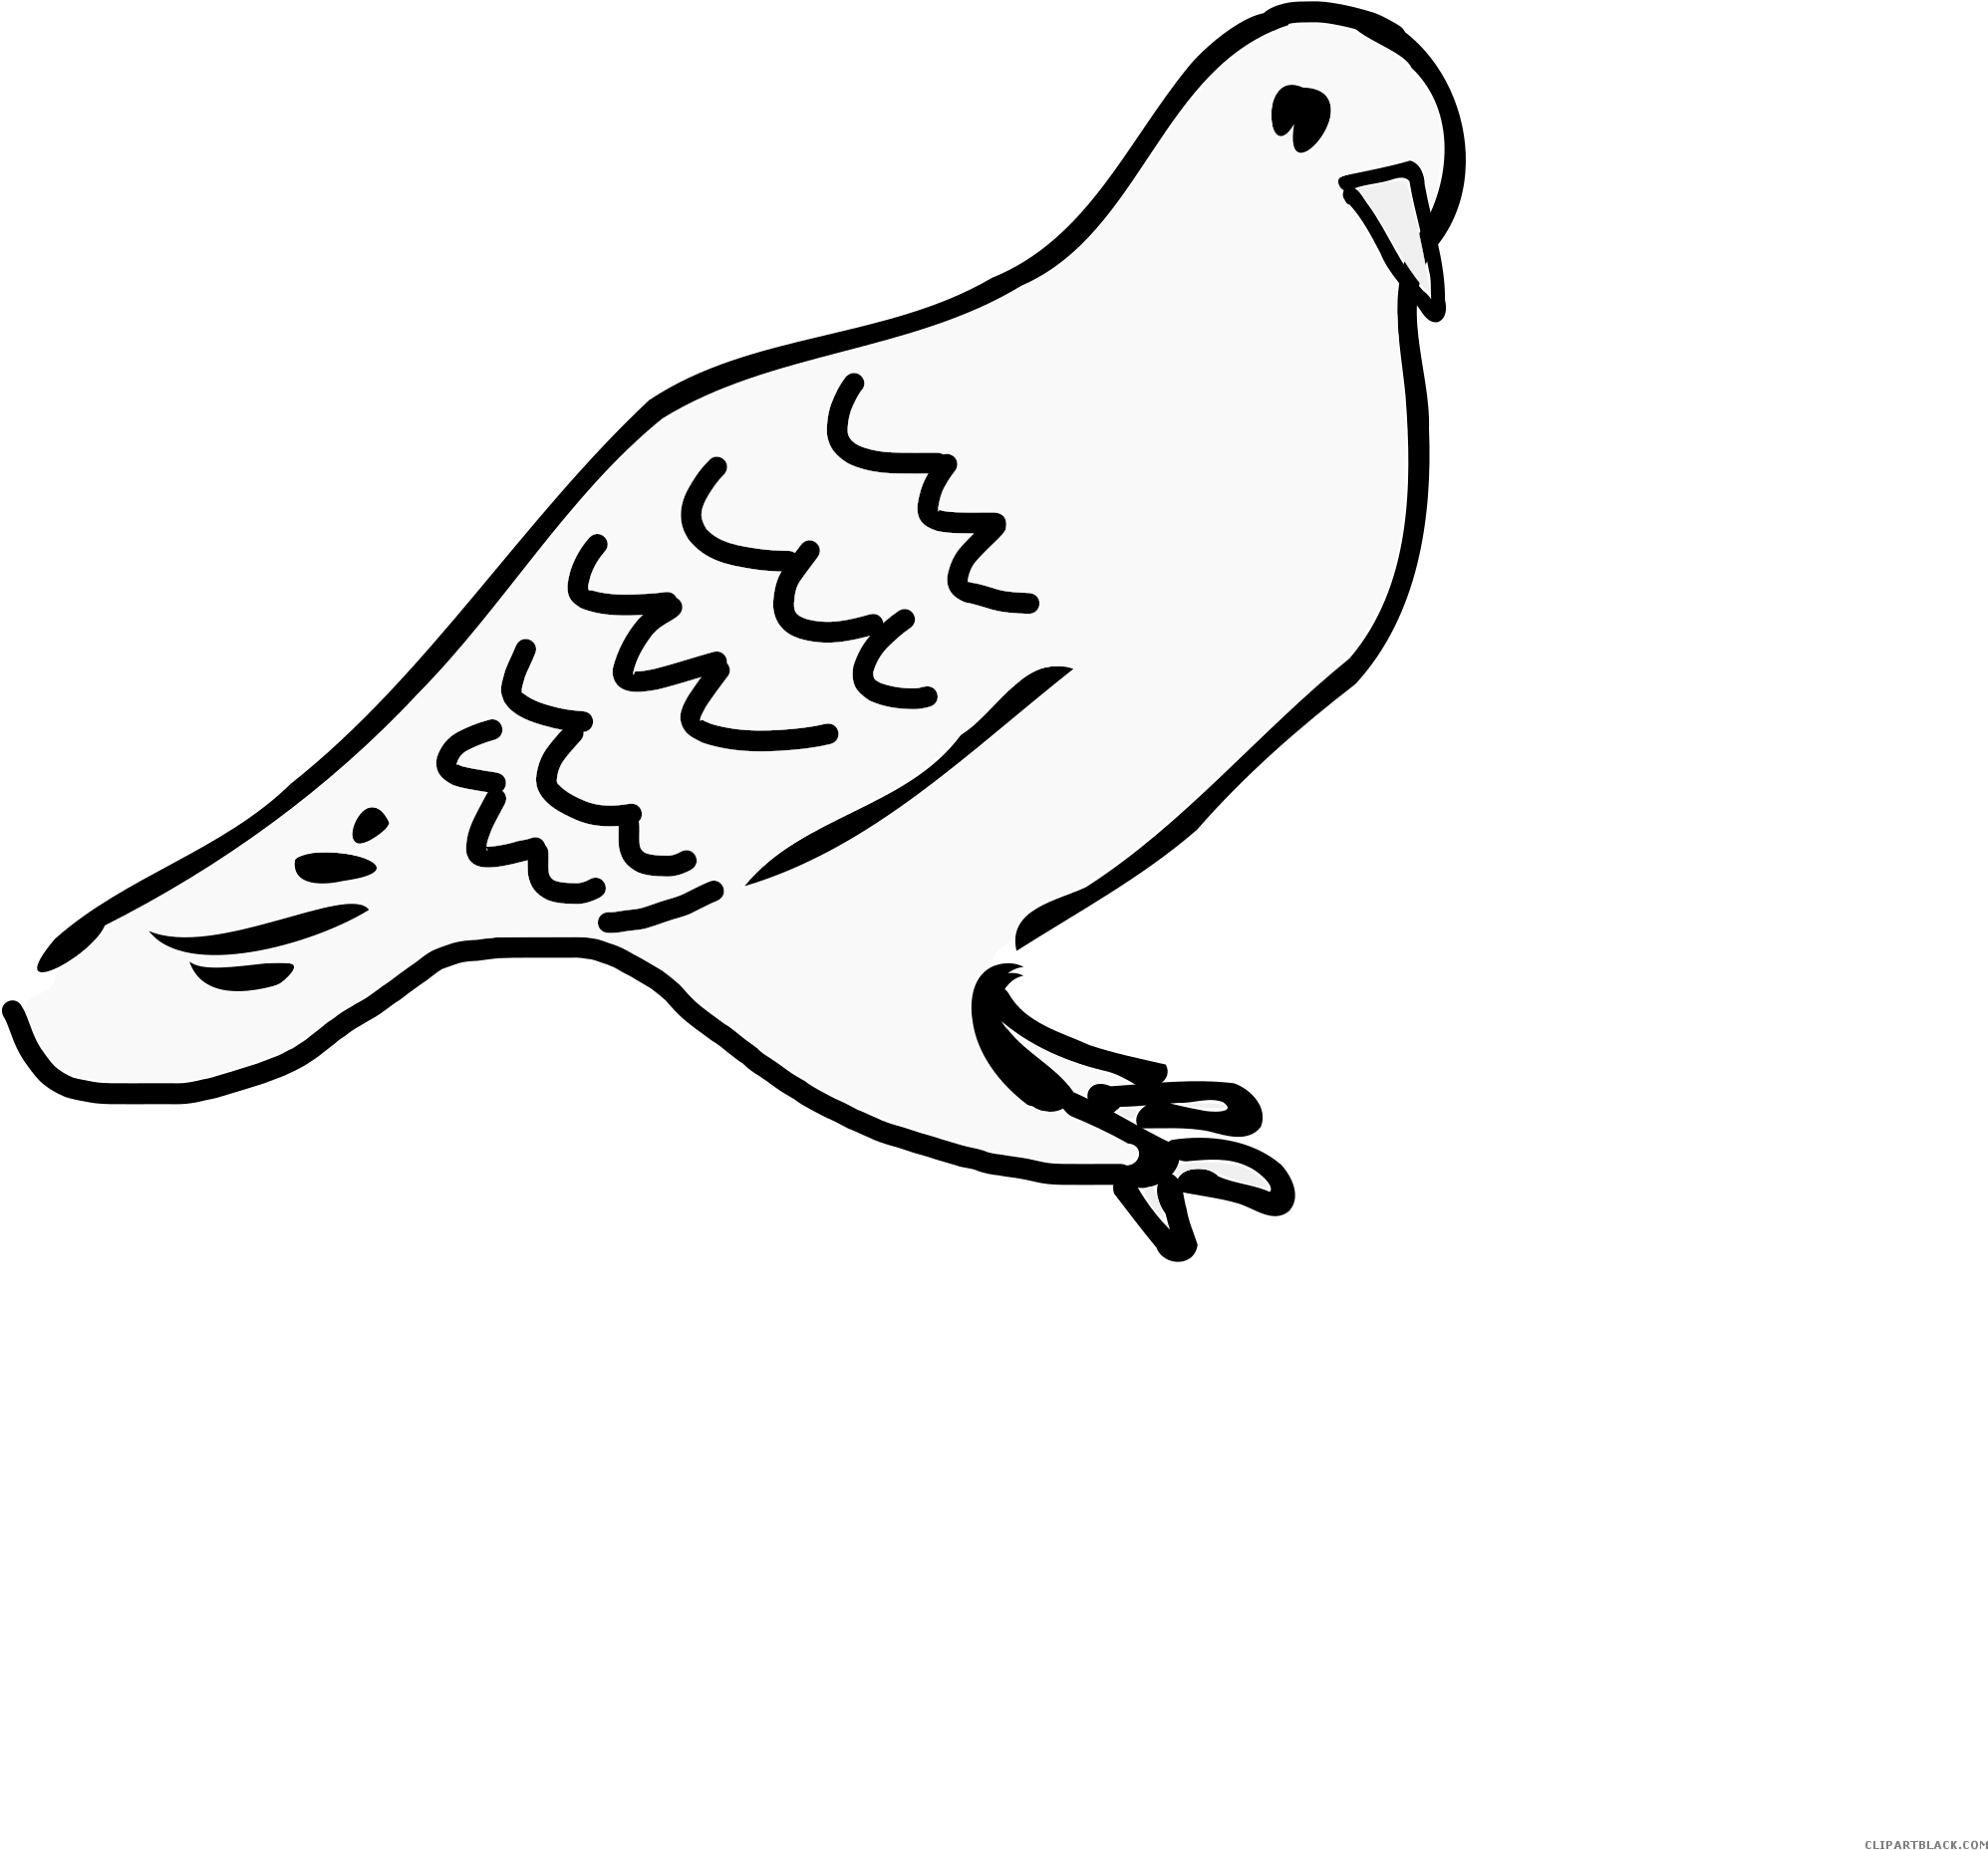 Love Doves Animal Free Black White Clipart Images Clipartblack - Sitting Dove Drawing - Png Download (1995x1857), Png Download